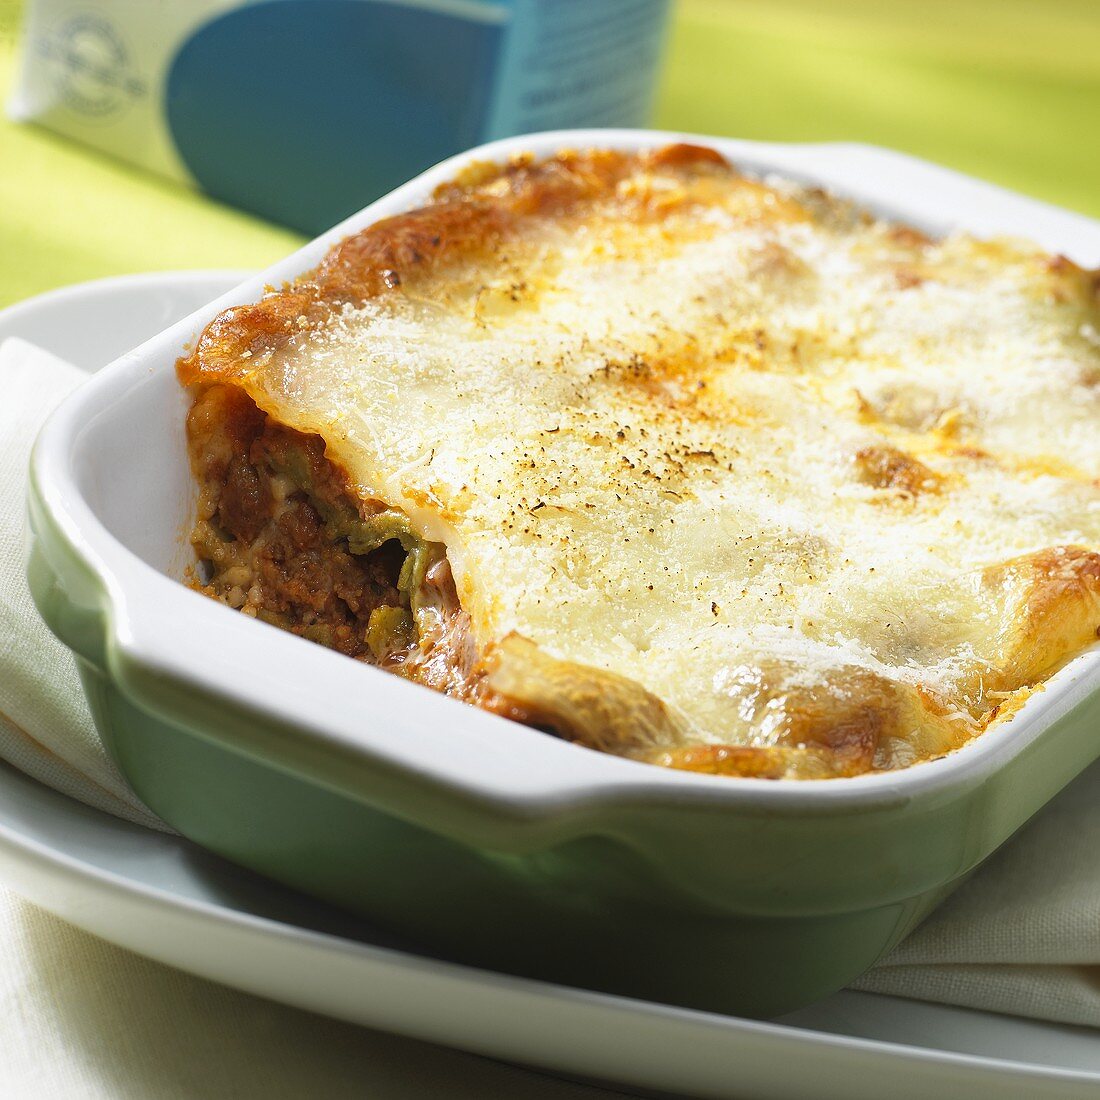 Lasagne, with a piece taken, in a baking dish